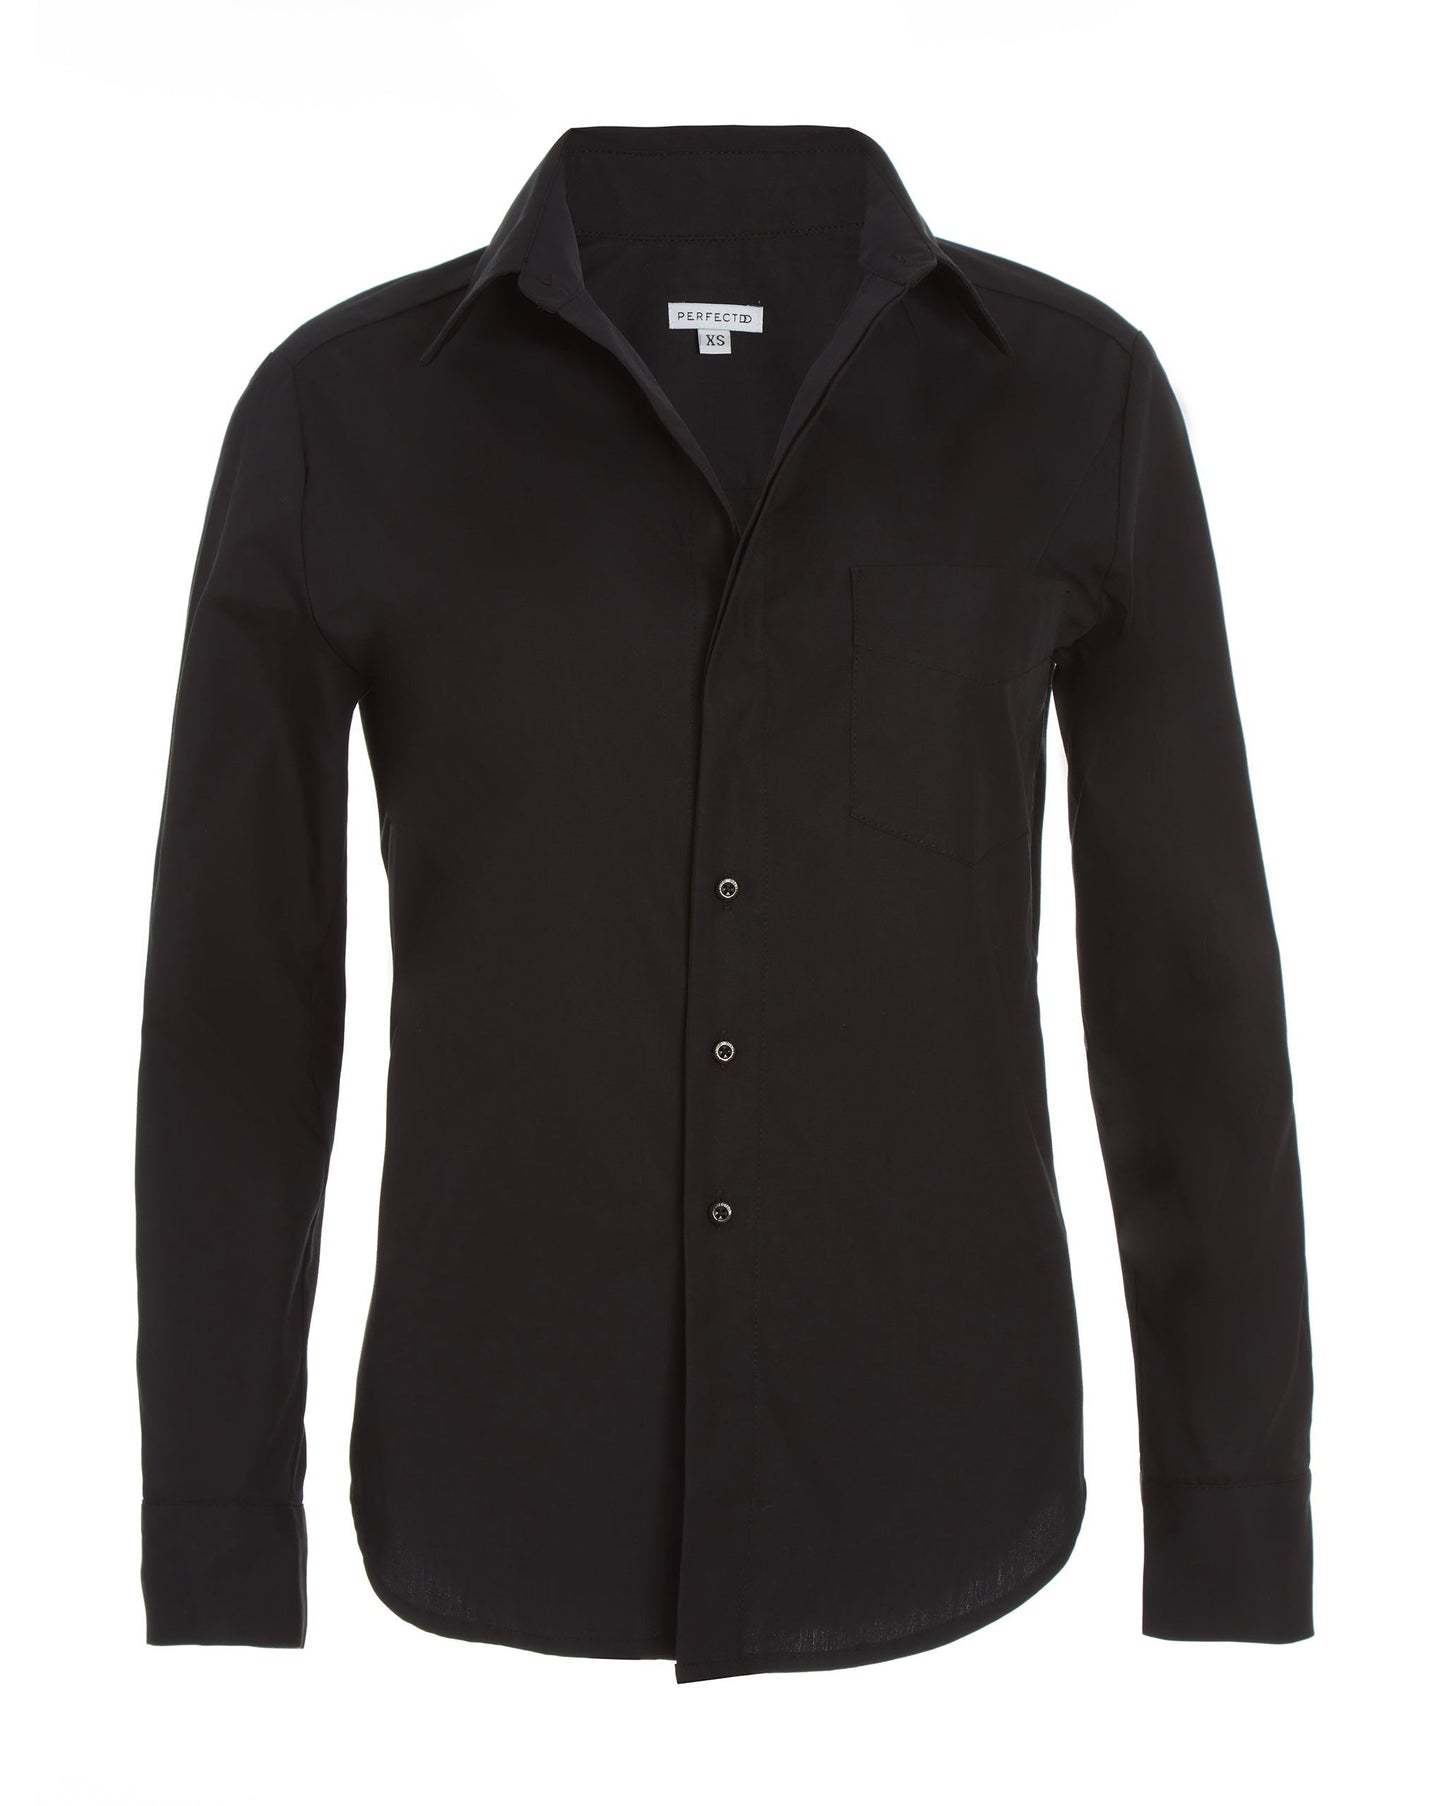 Front flay lay of black cotton long sleeve classic button down